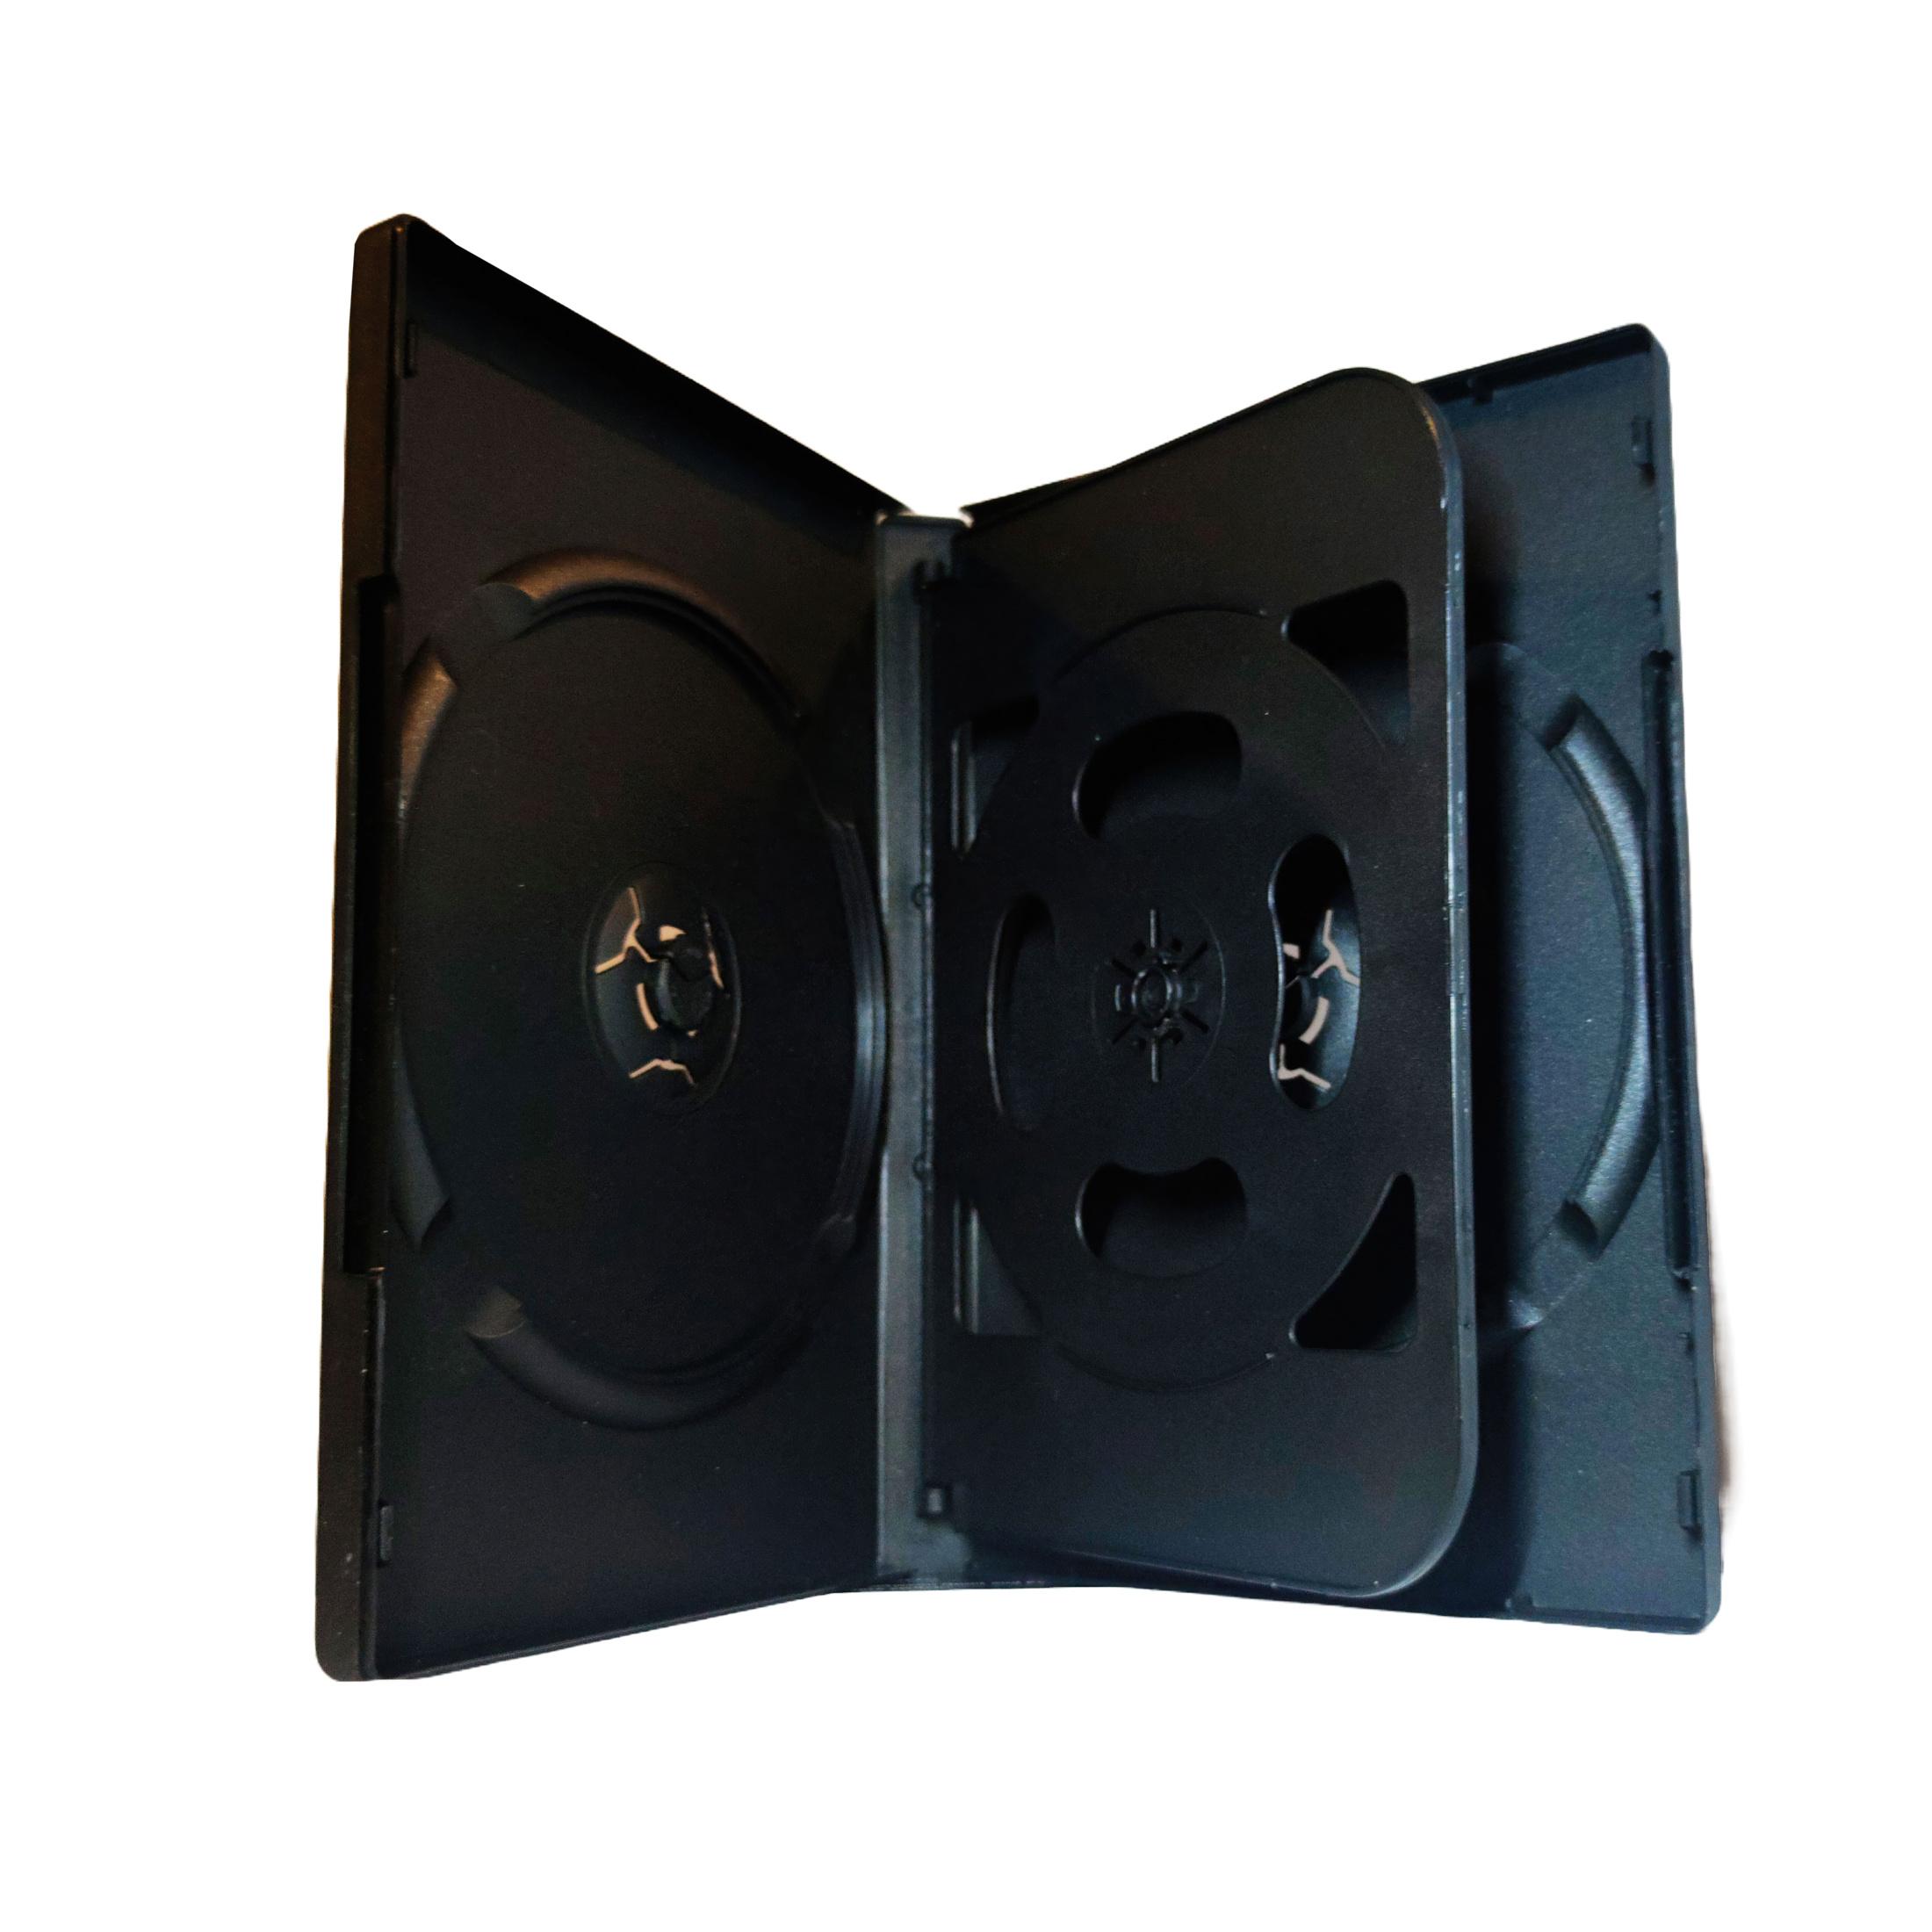 COVER IT Box: 4 DVD 19mm Black - Pack of 10